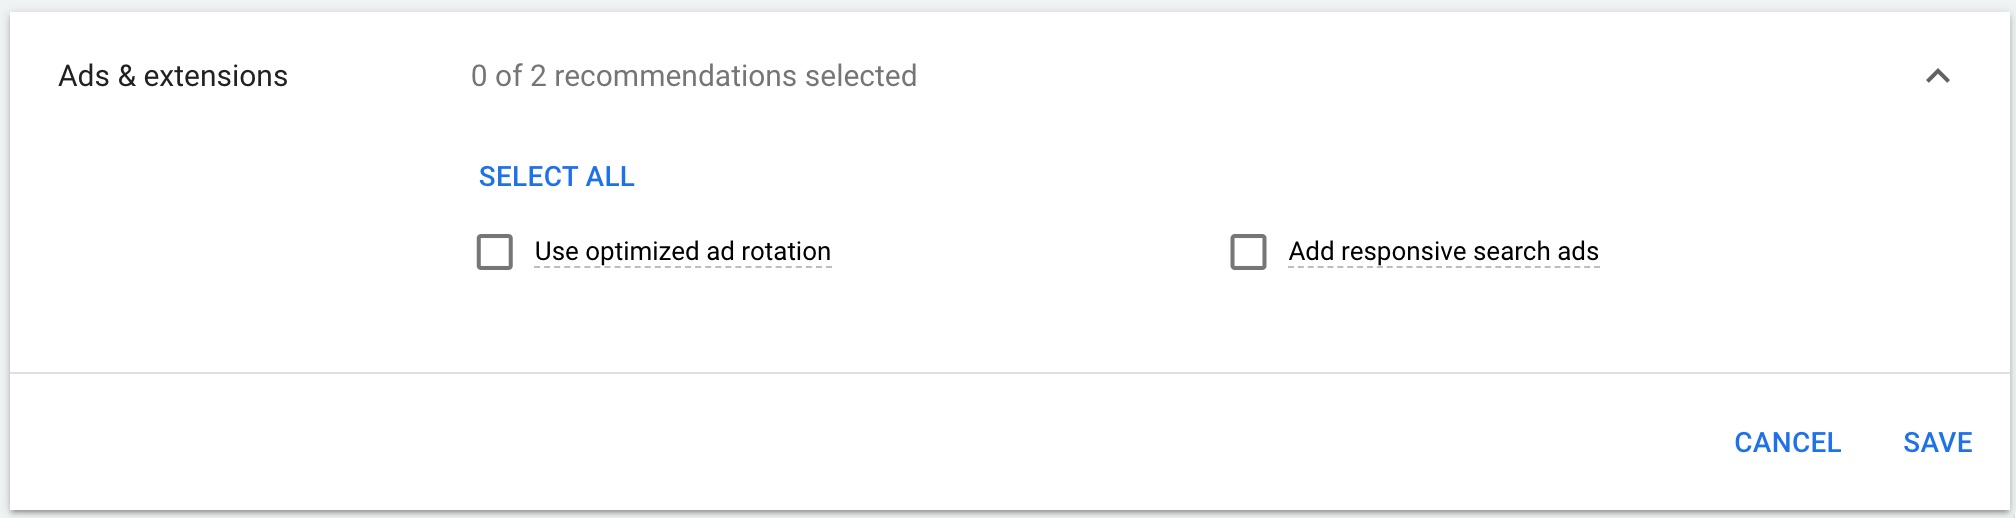 Google recommendations related to ads and extensions.